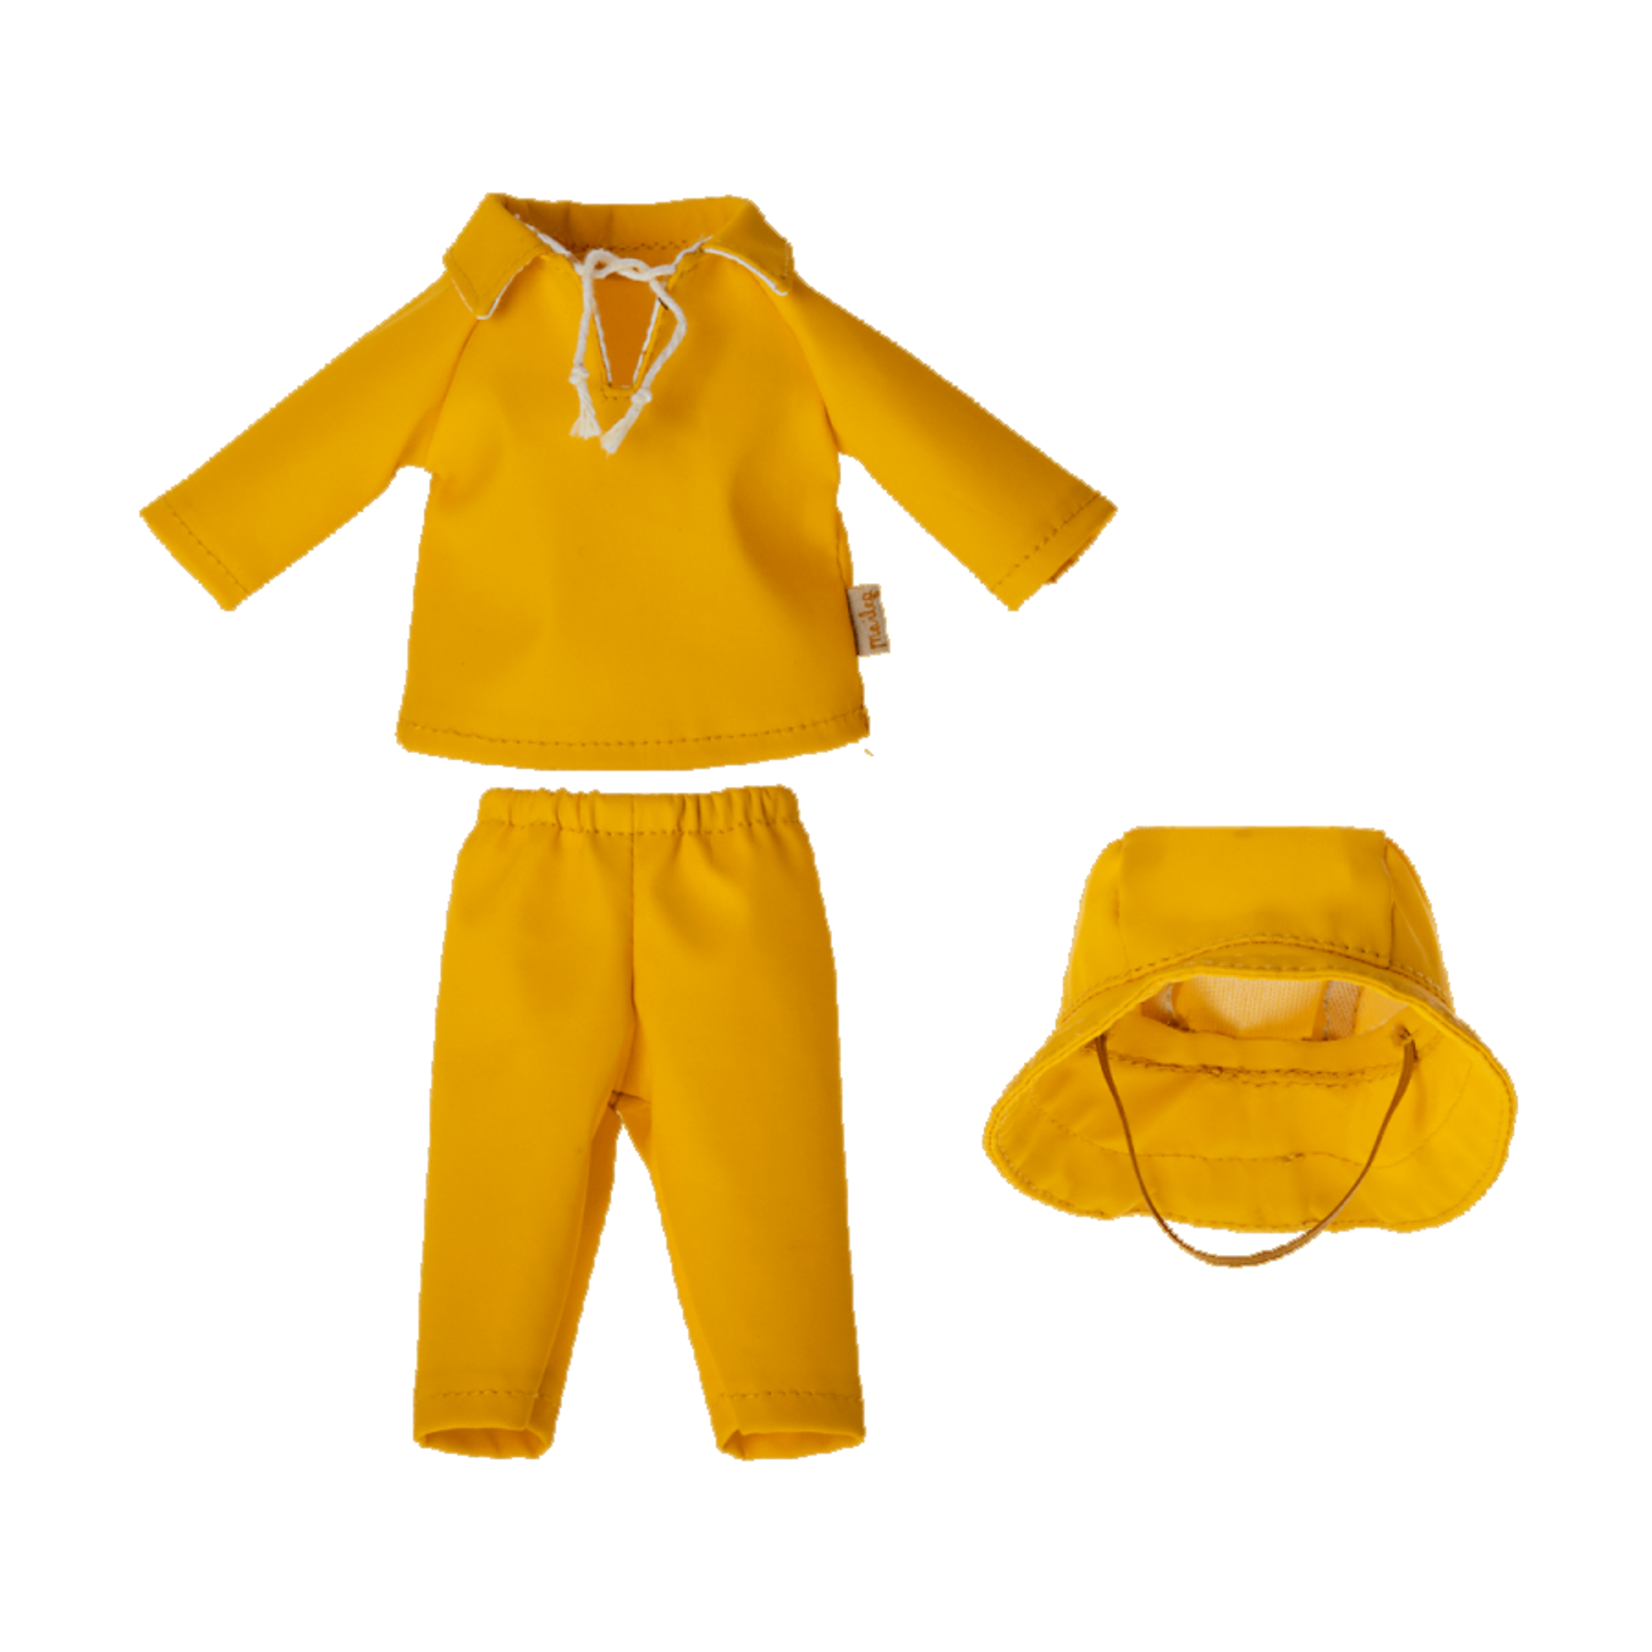 Maileg Maileg Yellow Rainwear with hat CLOTHES for Teddy dad